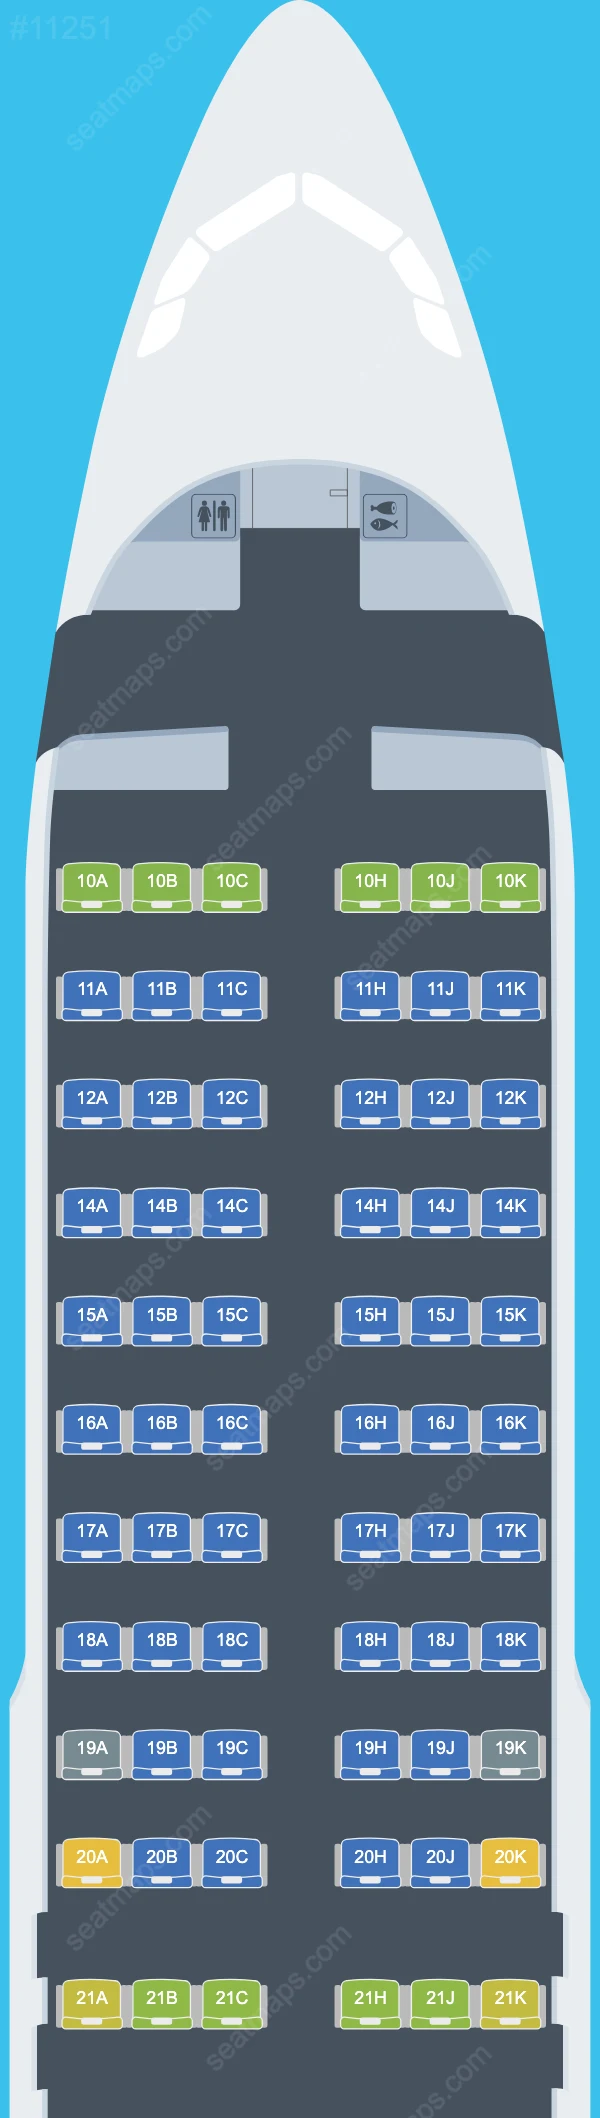 SmartLynx Airbus A320-200 V.4 seatmap preview